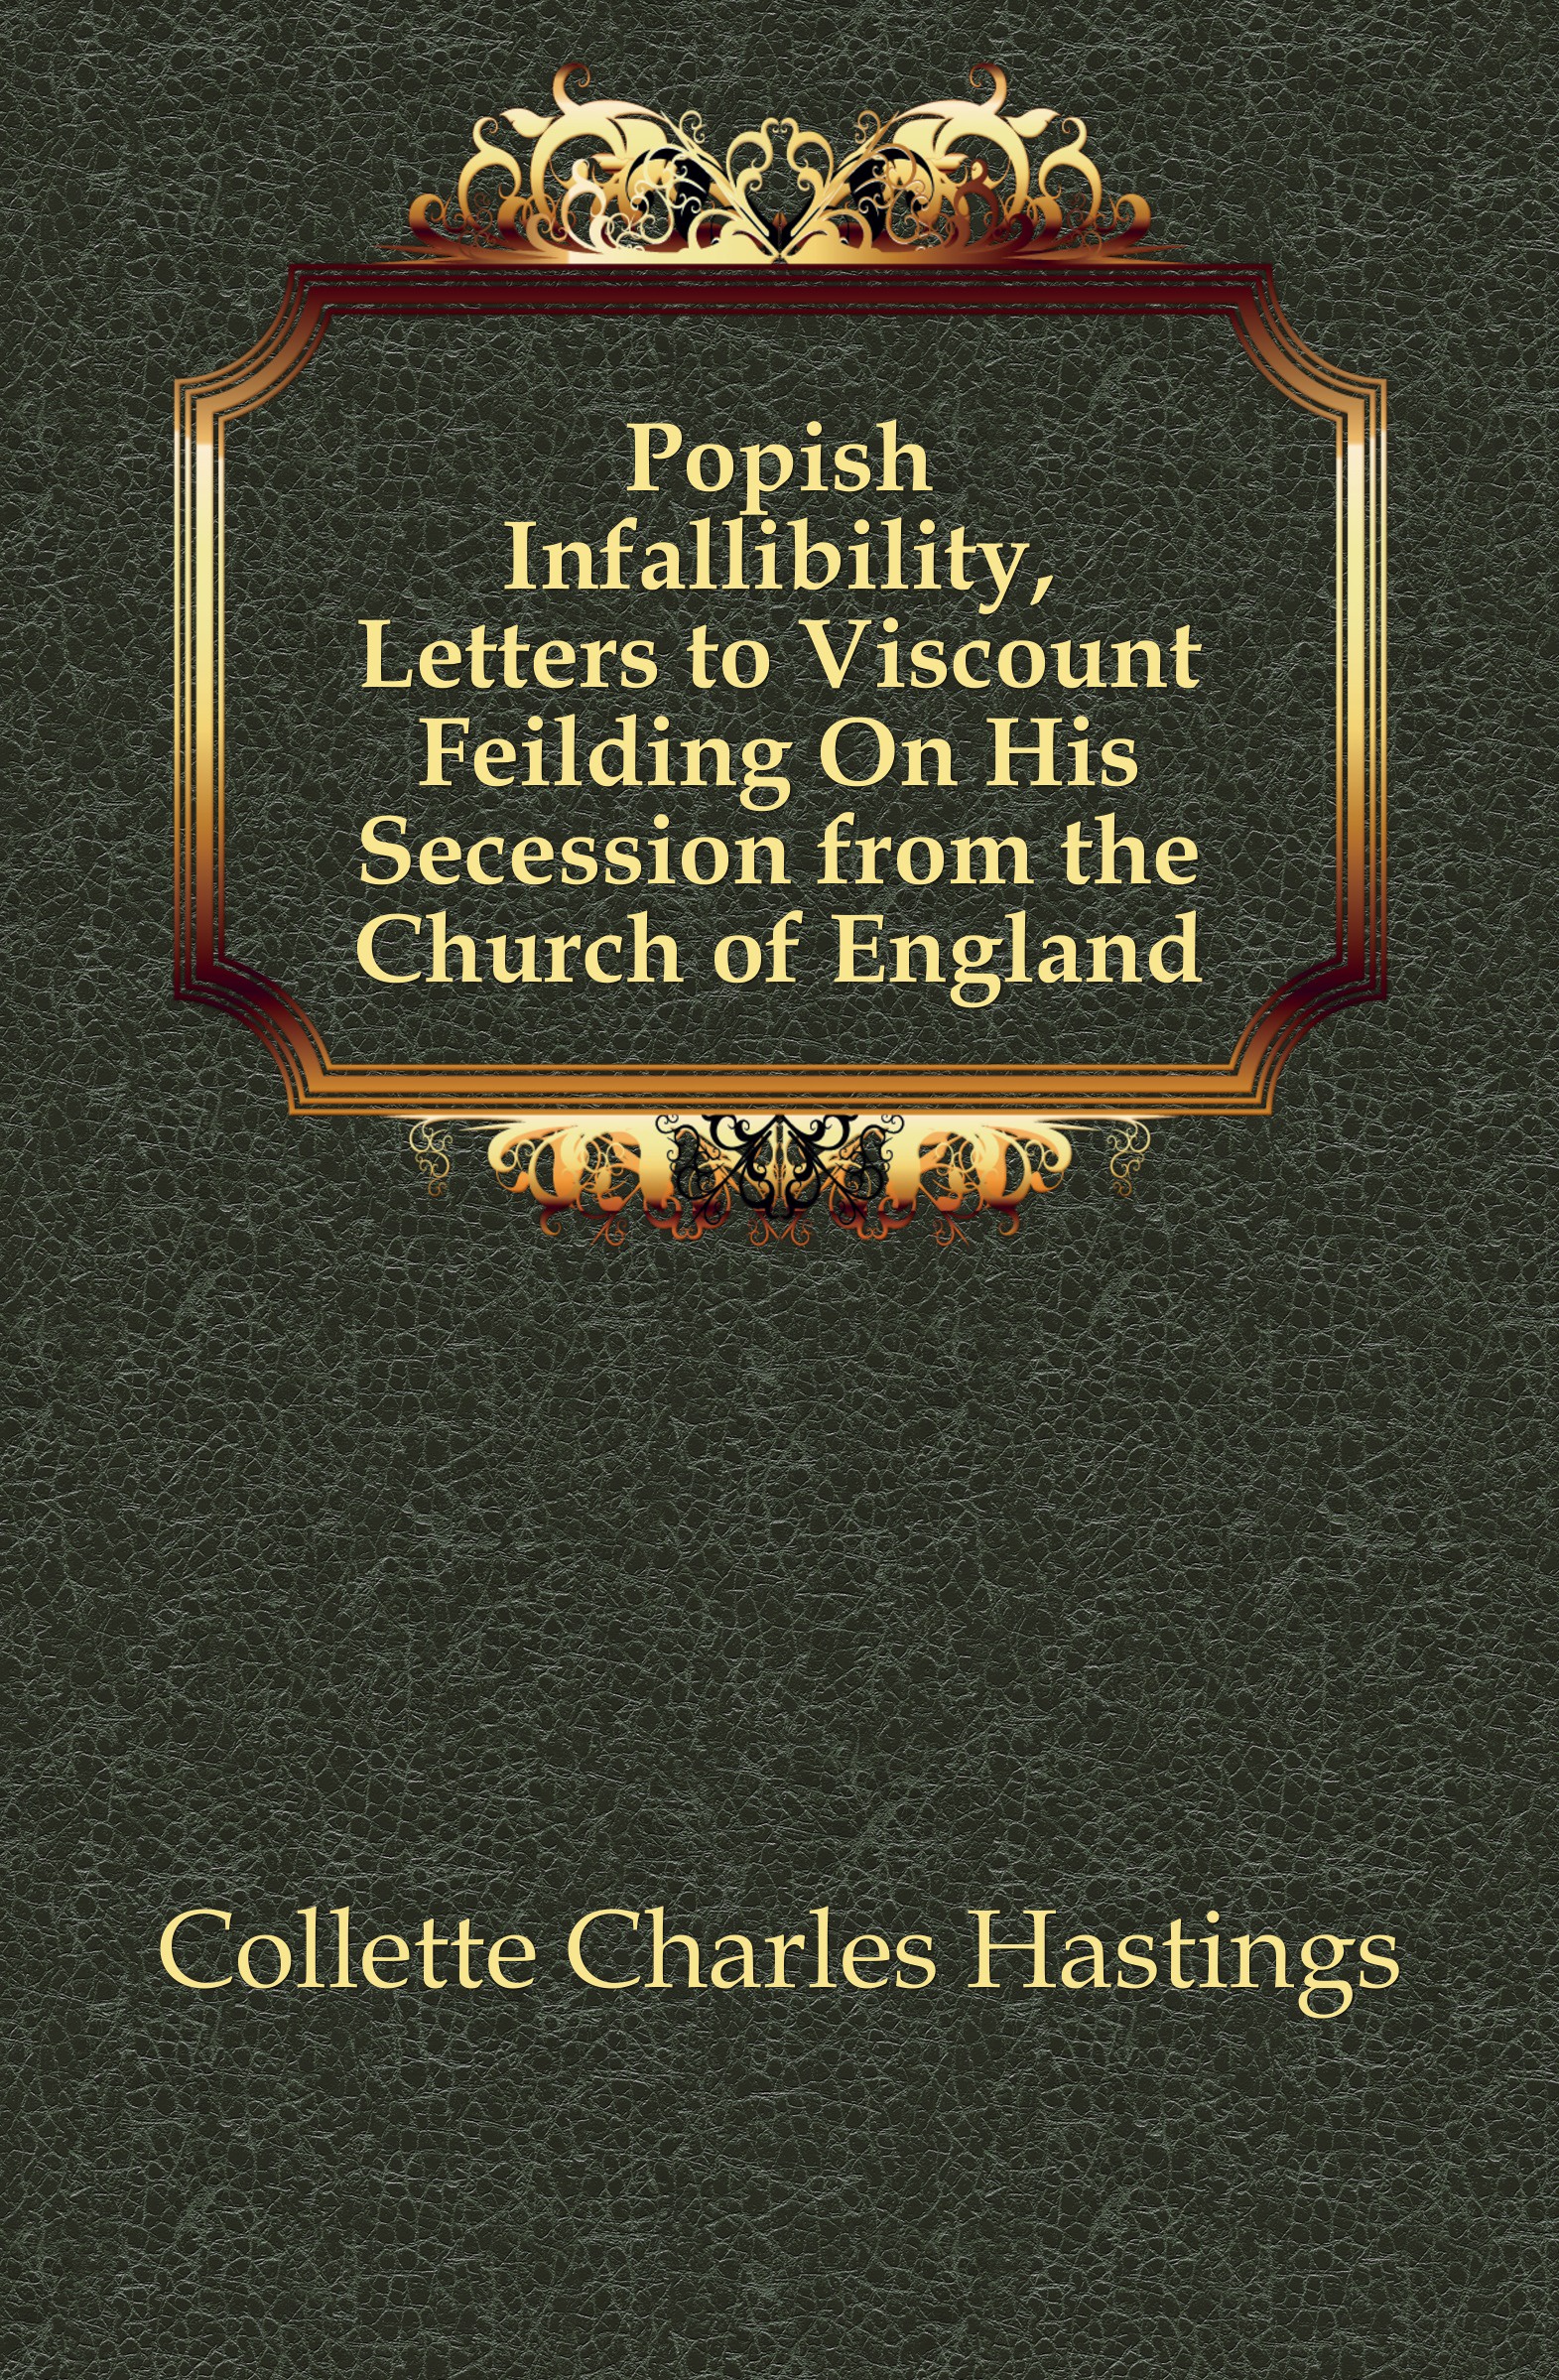 Collette Charles Hastings Popish Infallibility, Letters to Viscount Feilding On His Secession from the Church of England